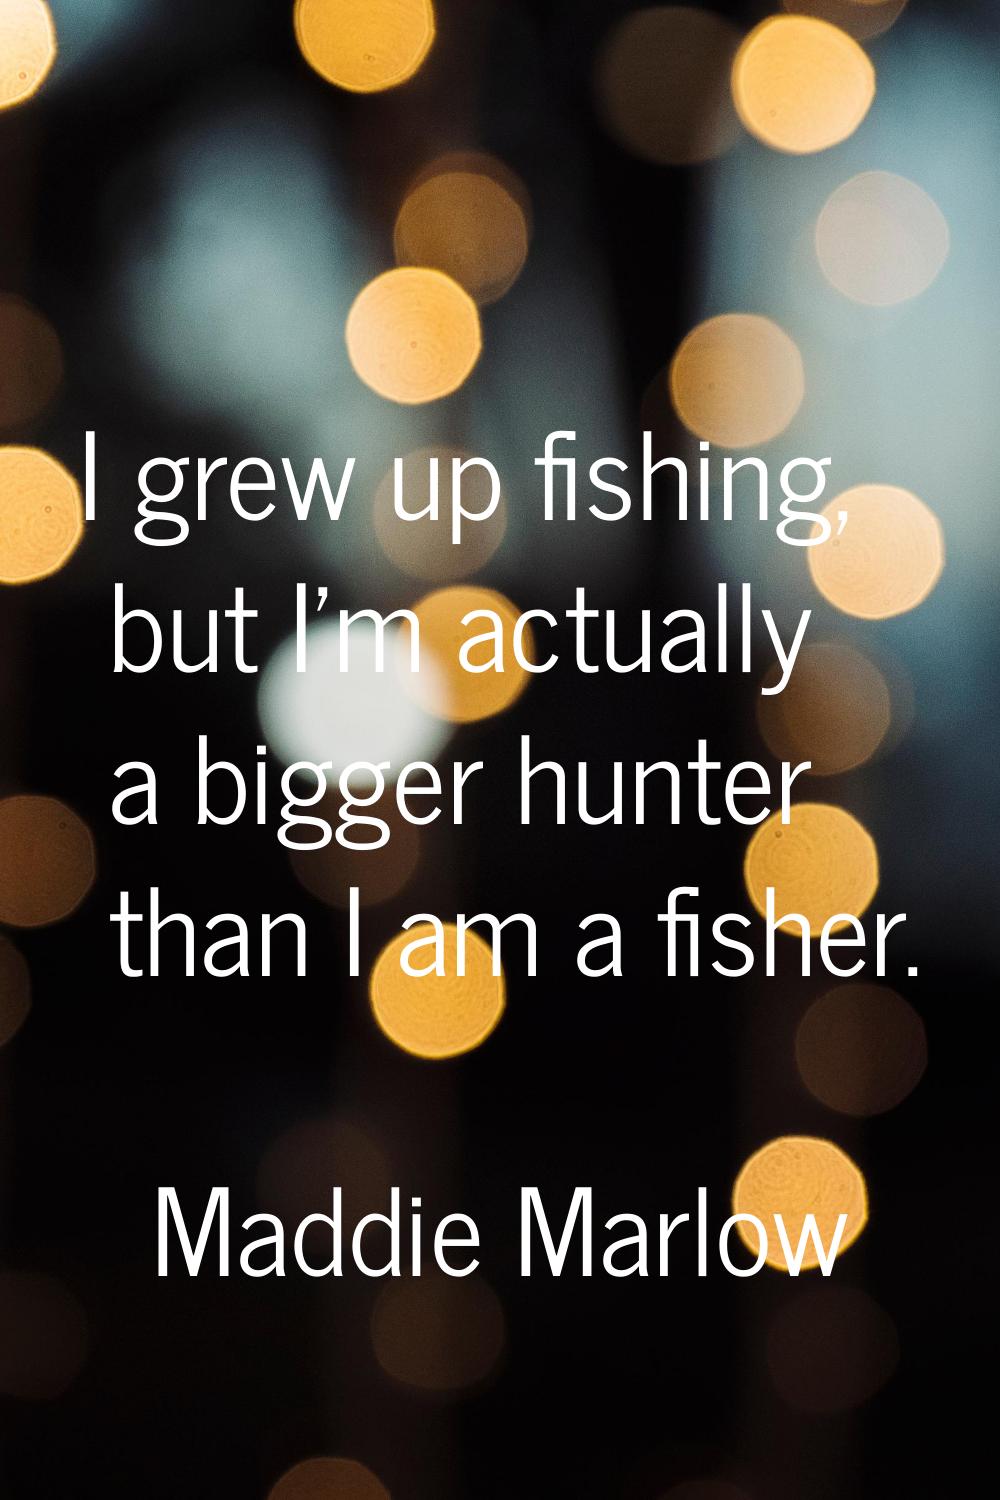 I grew up fishing, but I'm actually a bigger hunter than I am a fisher.